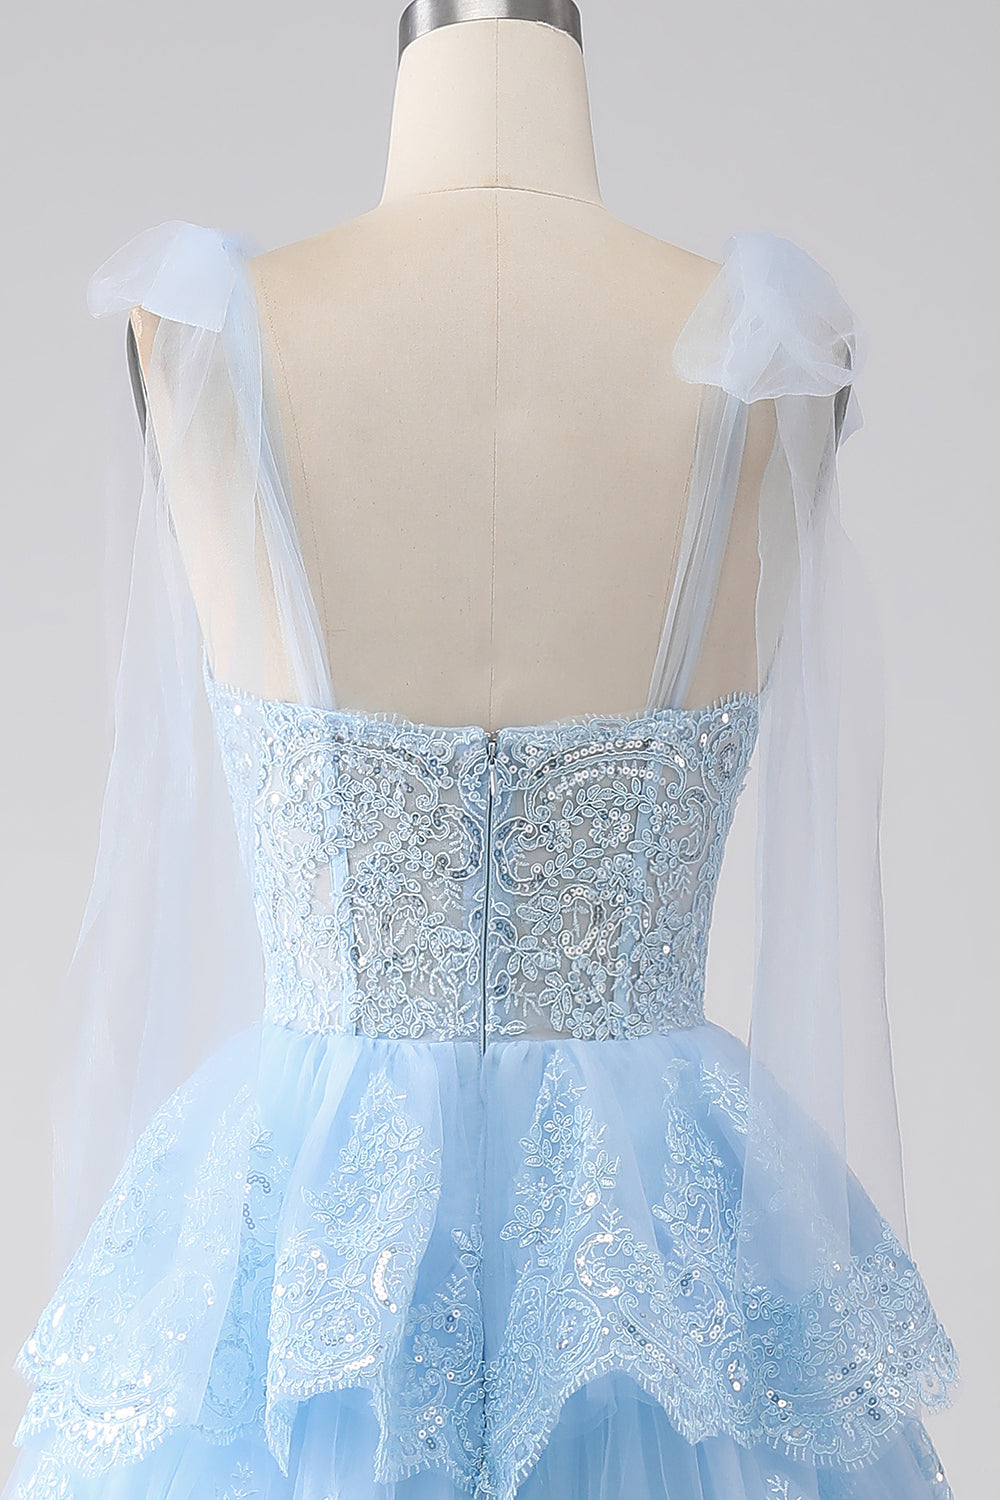 Light Blue Sweetheart Bow Tie Straps Tiered Tulle Sequin Prom Dress with Appliques